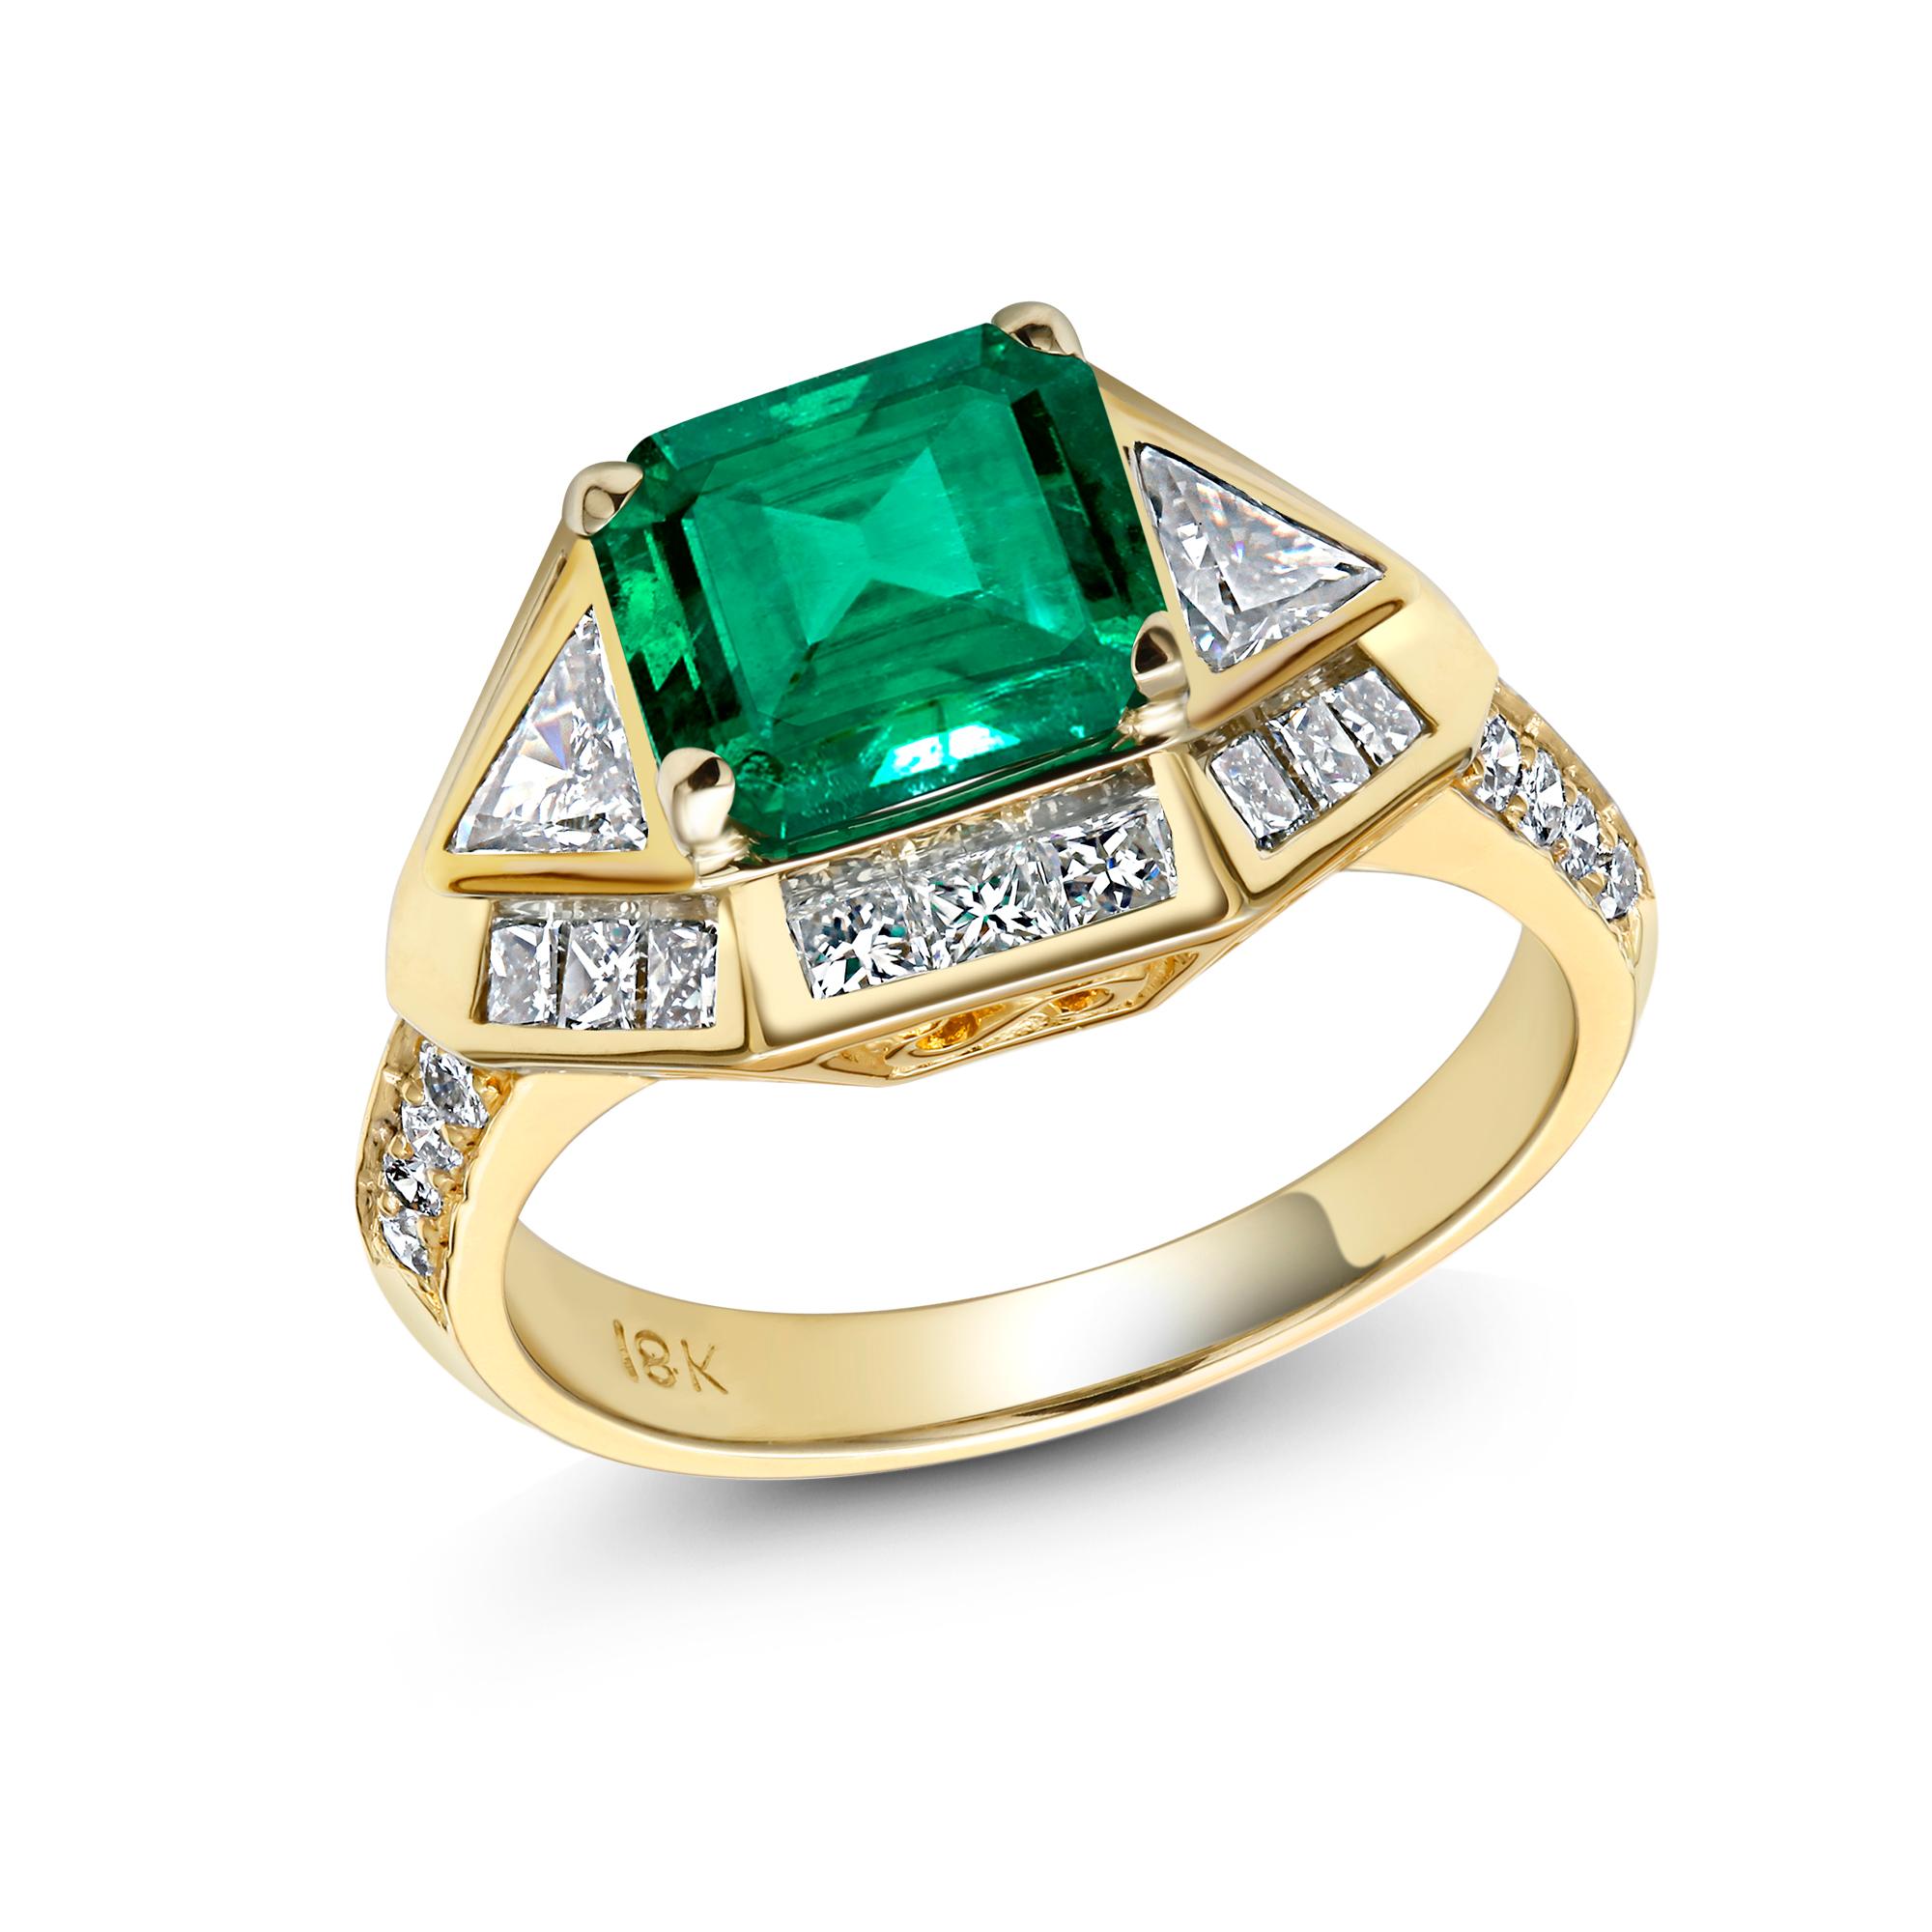 Emerald Cut Colombian Emerald Diamond Cocktail Ring Weighing 3.57 Carat